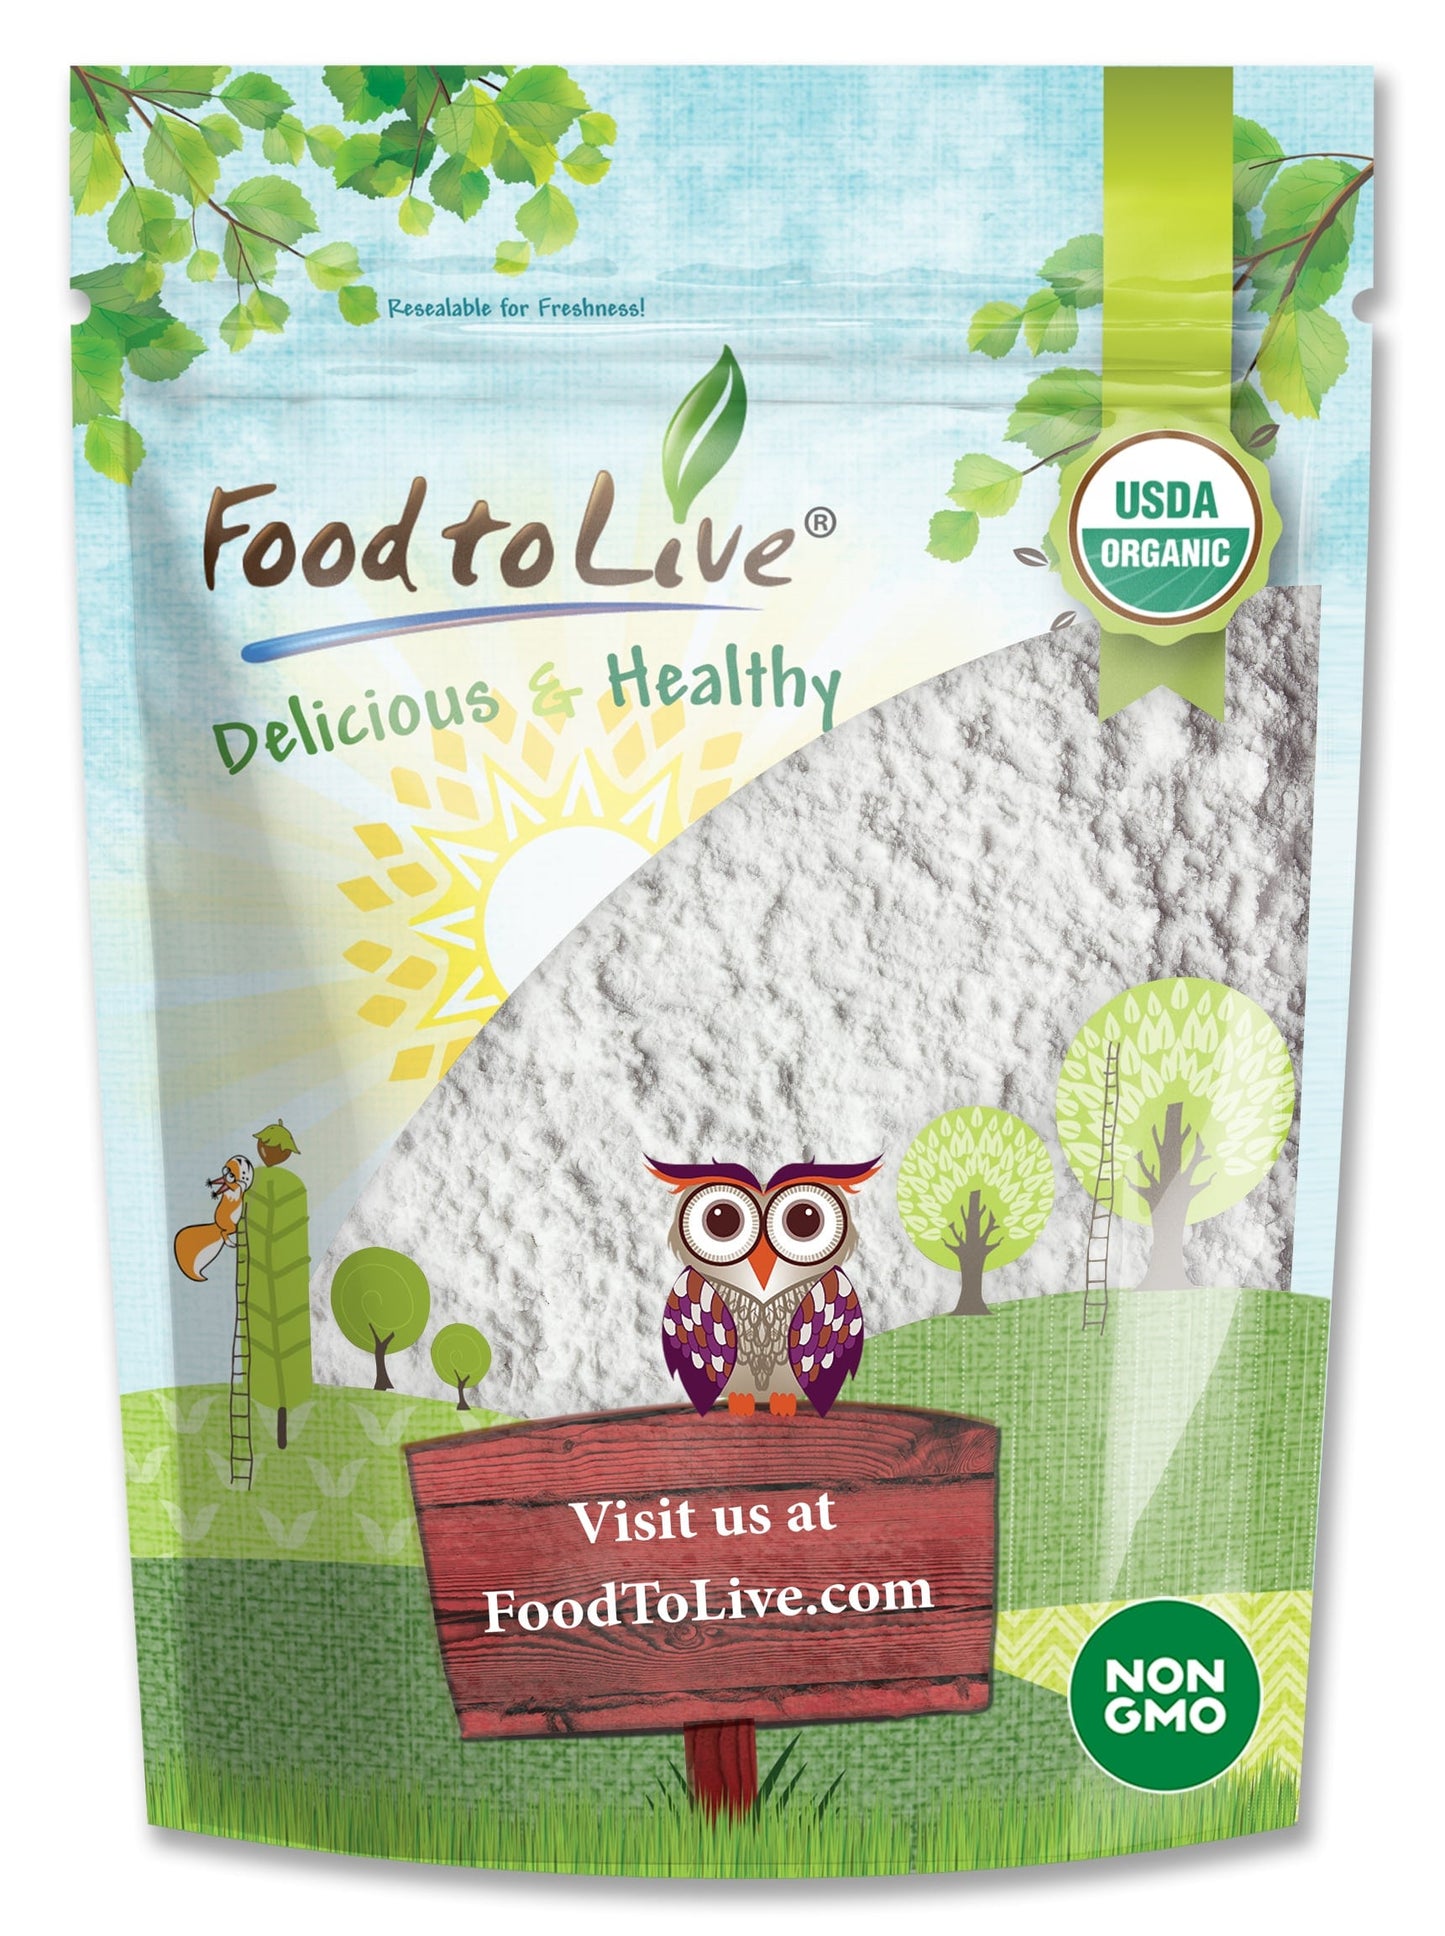 Organic Potato Starch - Unmodified Powder, Non-GMO, Pure Flour, Kosher, Vegan, Bulk, Great for Cooking and Thickening - by Food to Live